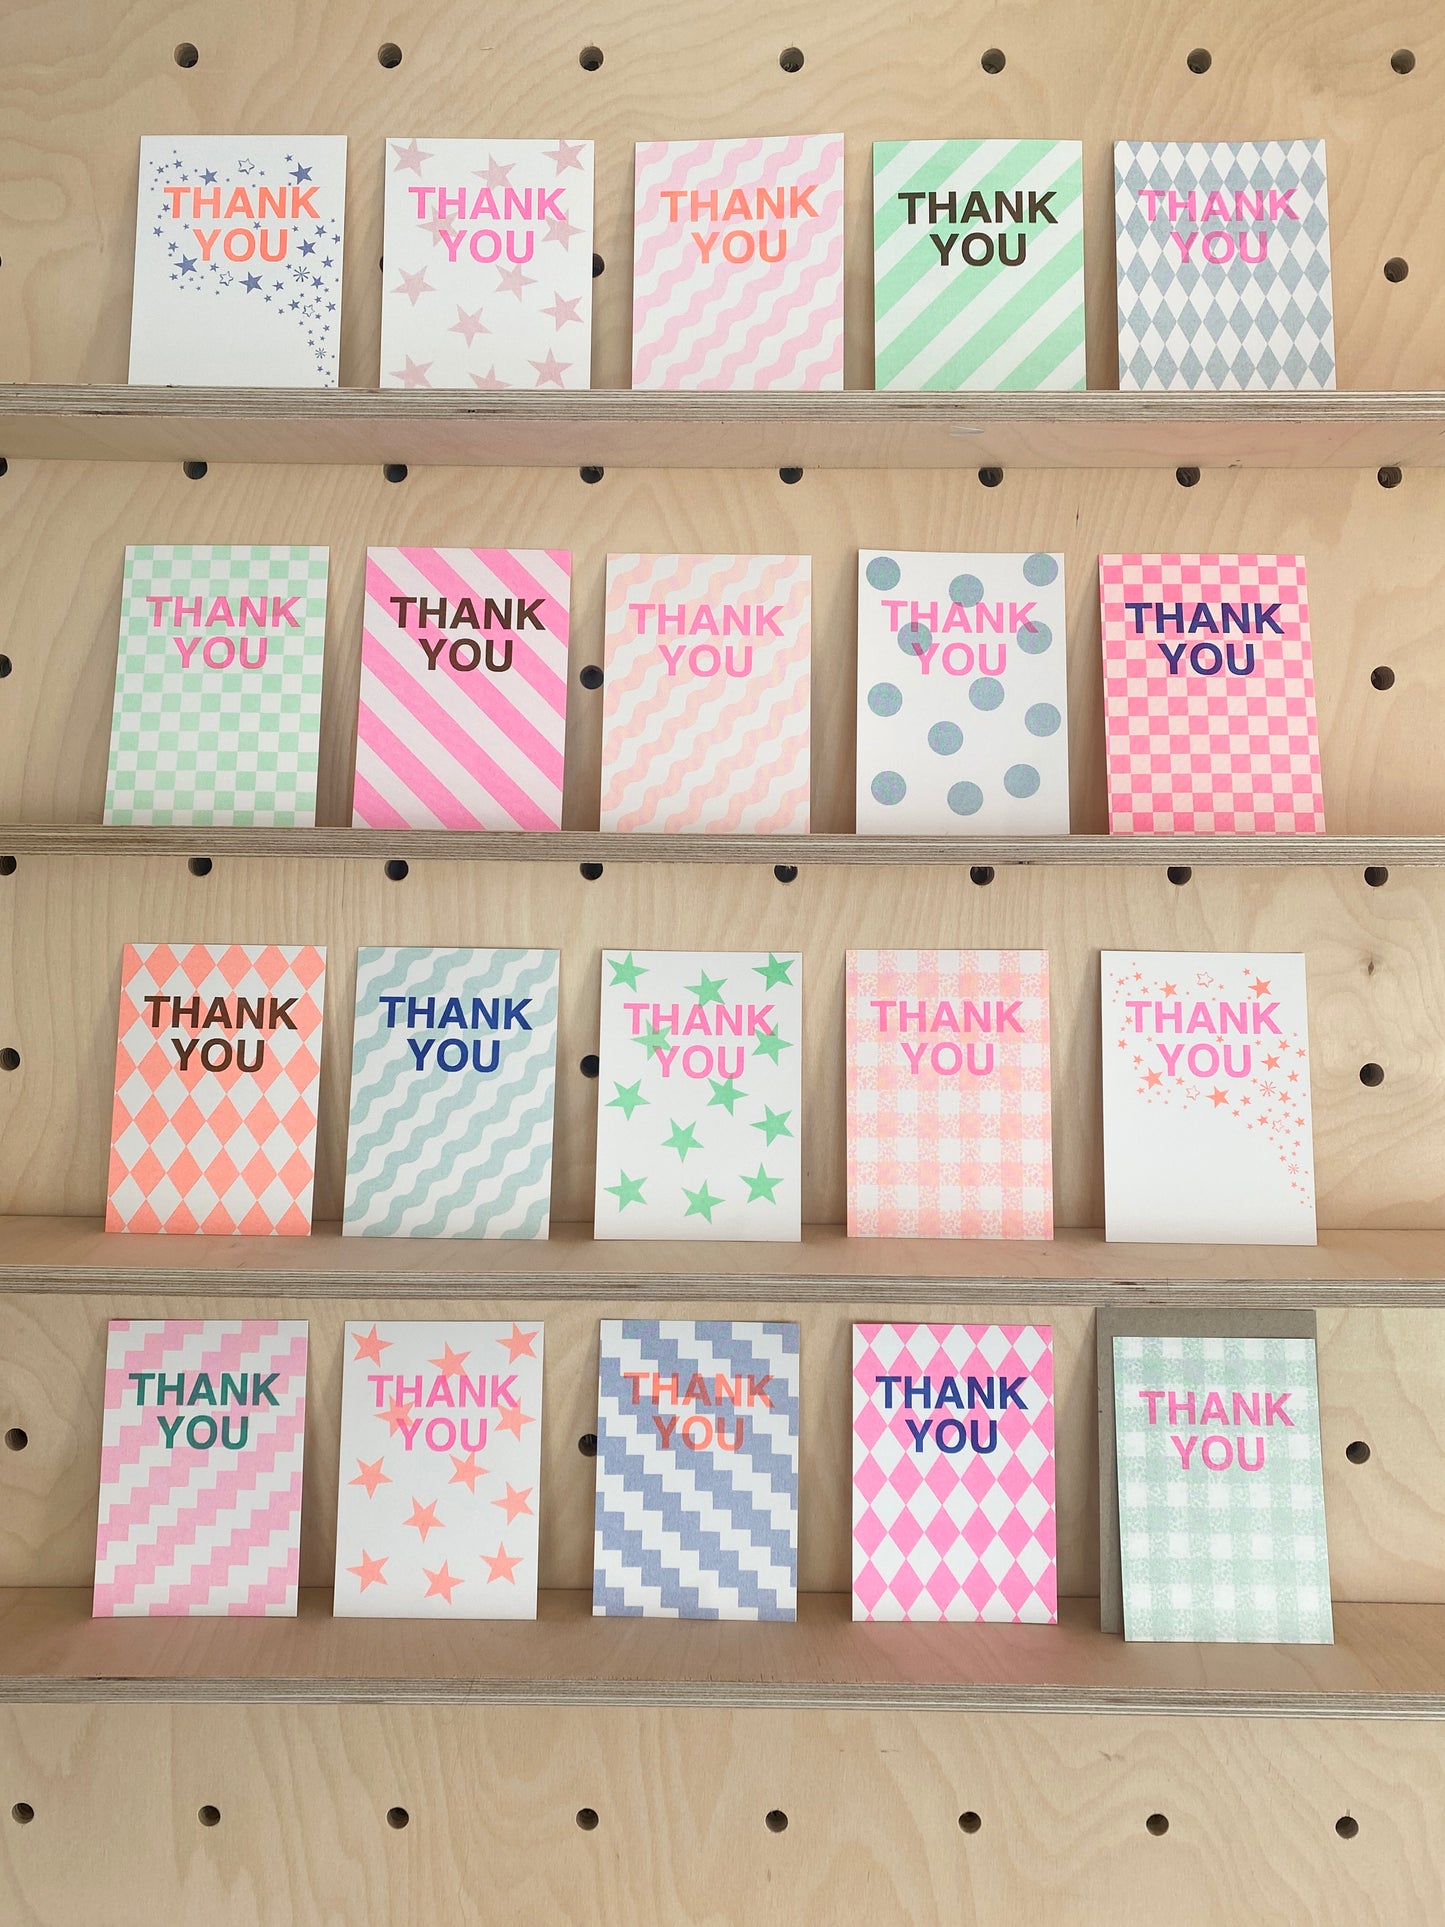 A6 Thank You Cards - Teal Spot